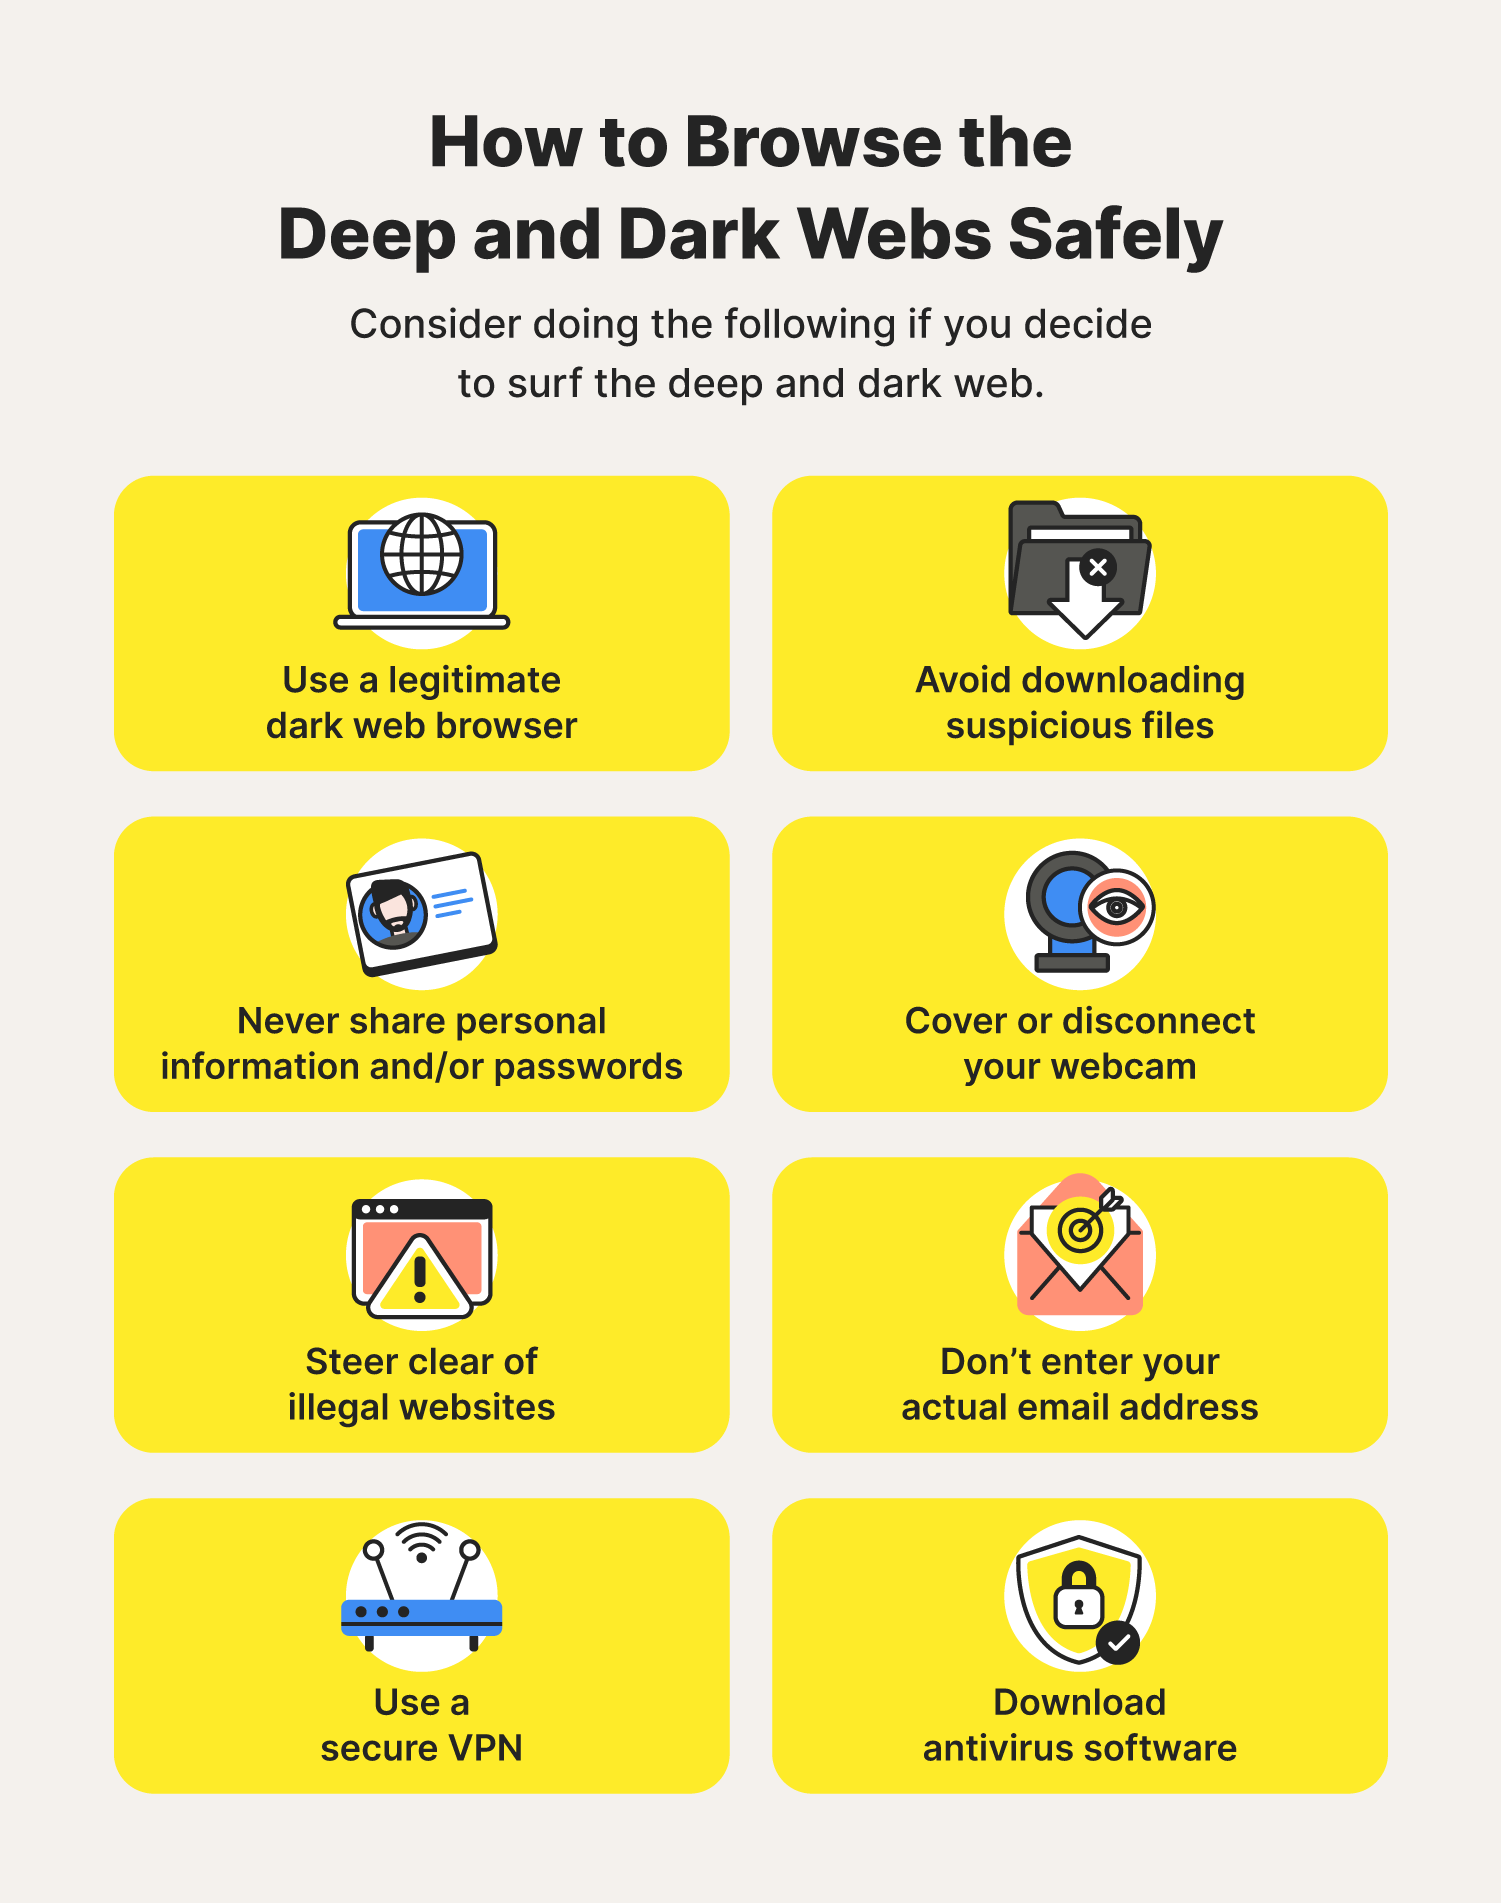 how to browse deep and dark webs safely